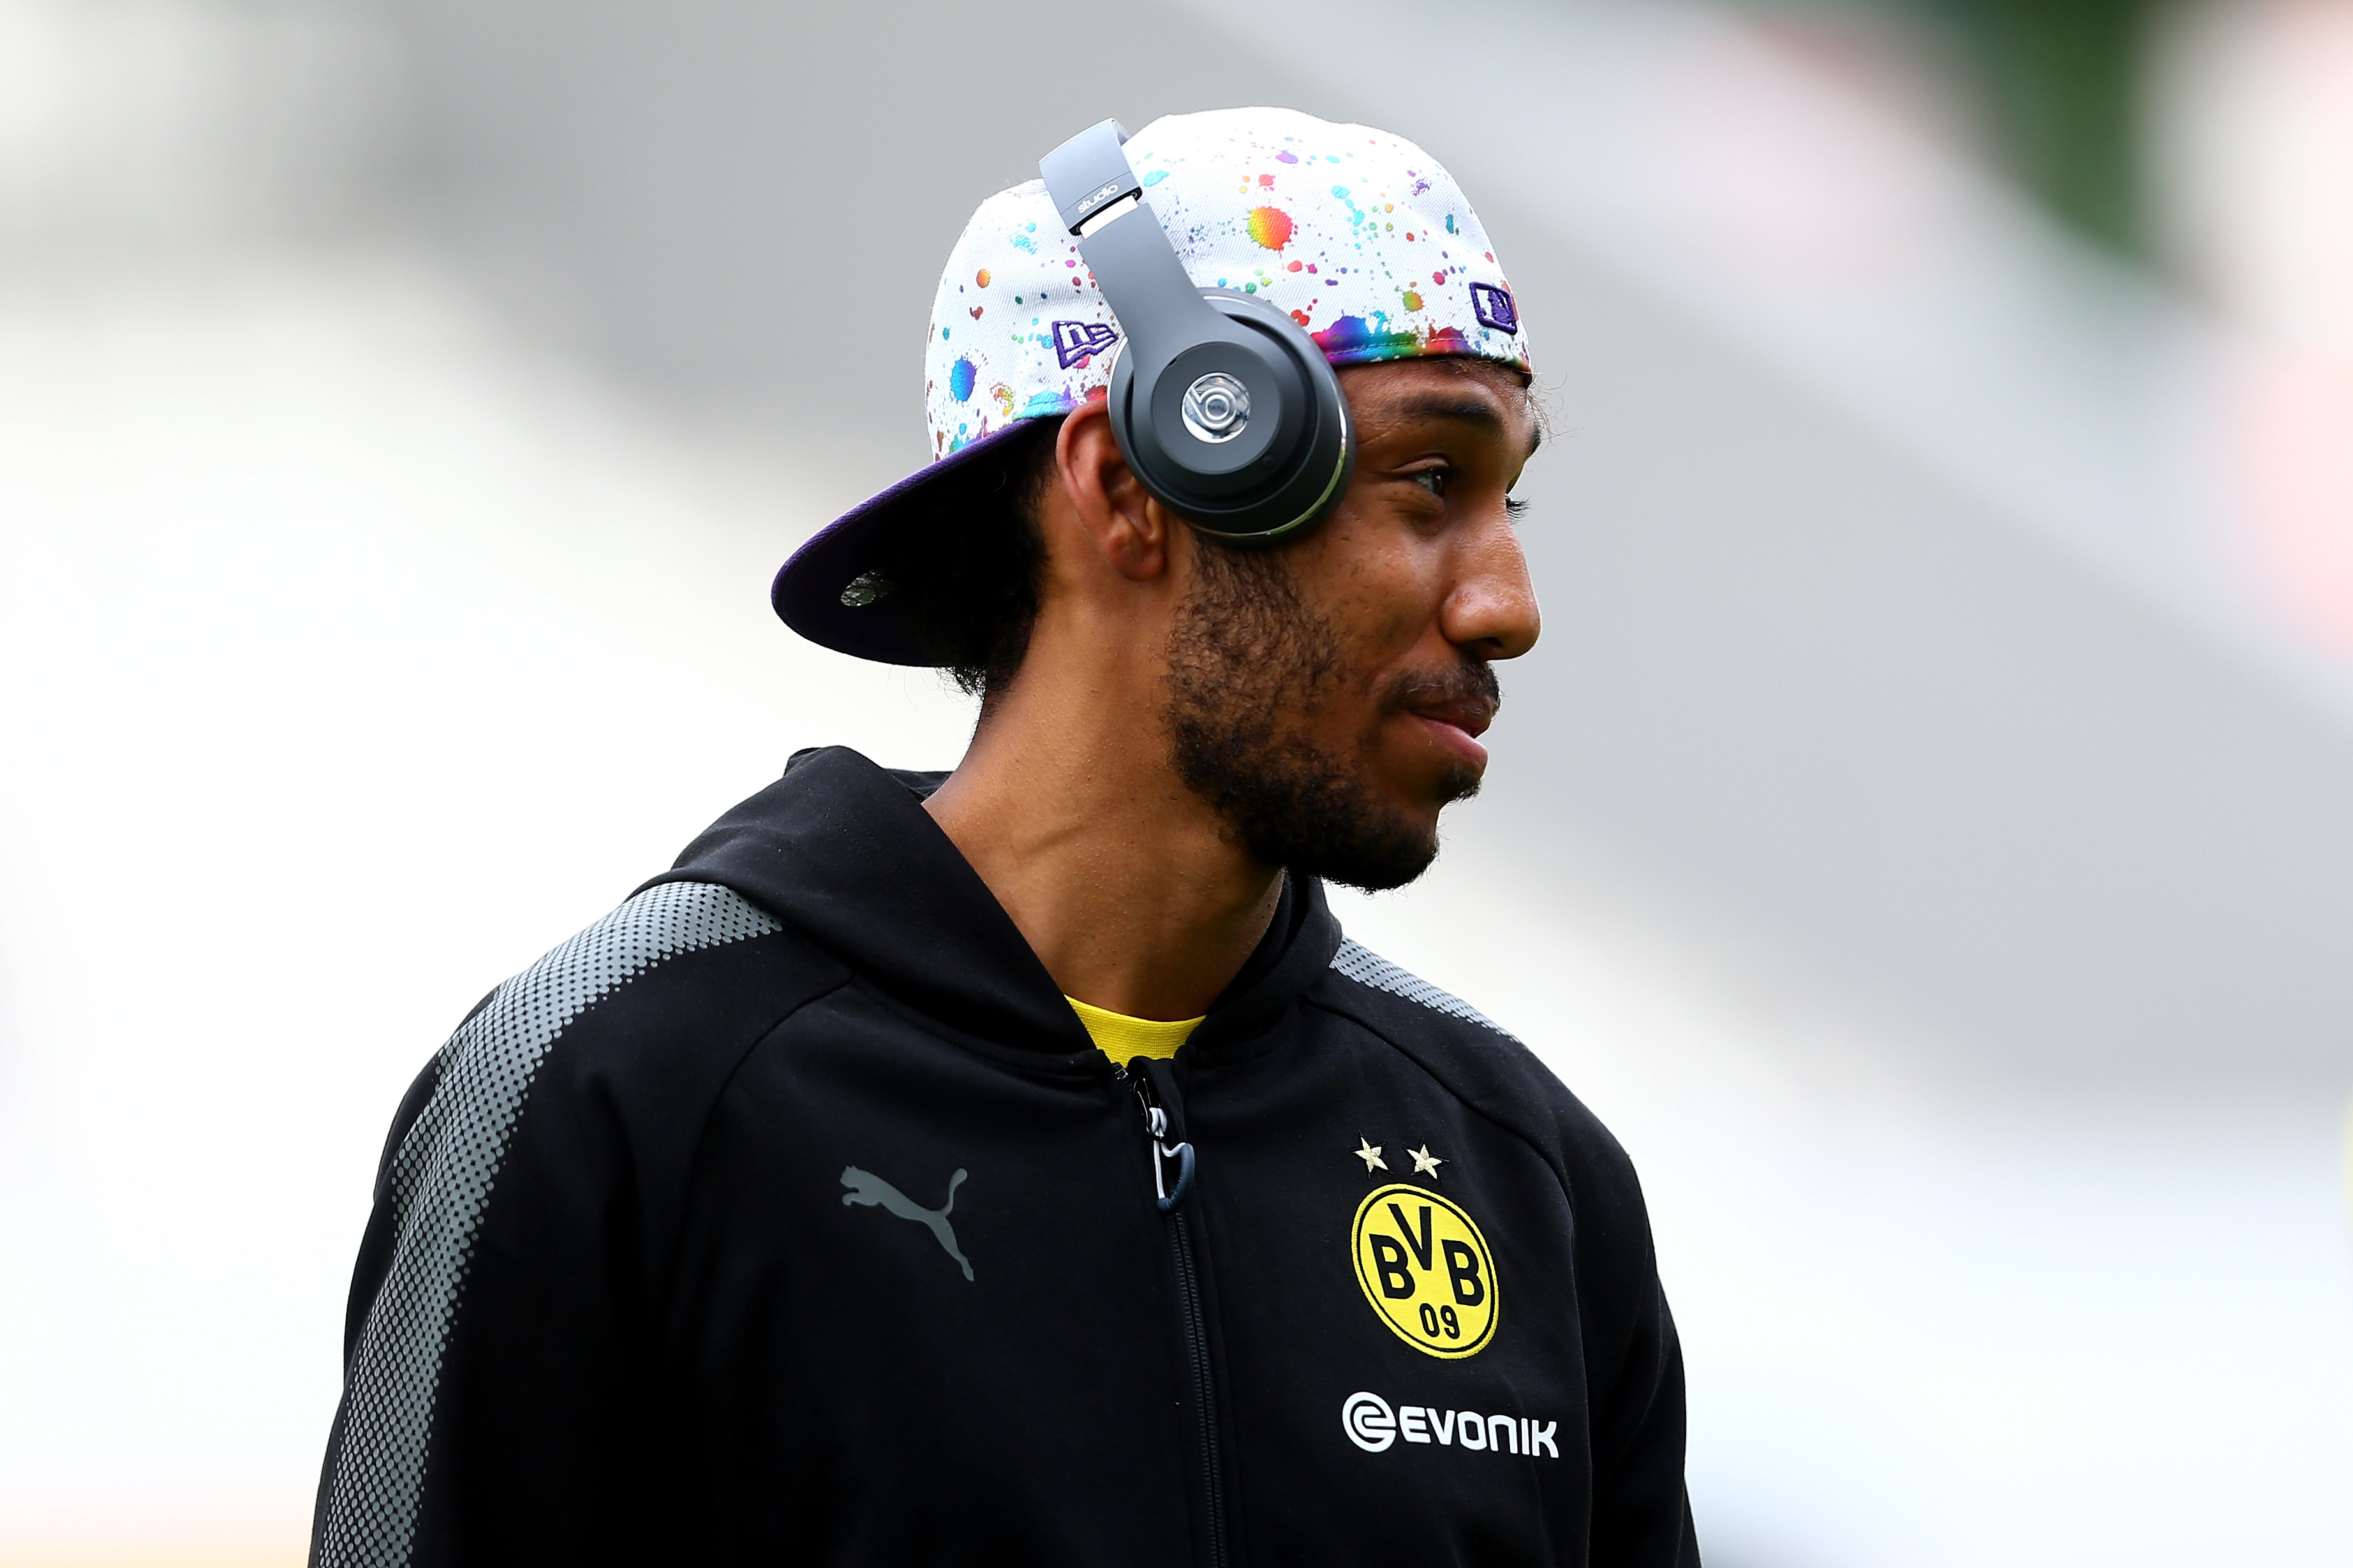 ESSEN, GERMANY - JULY 11:  Pierre-Emerick Aubameyang of Dortmund looks on prior to the preseason friendly match between Rot-Weiss Essen and Borussia Dortmund at Stadion Essen on July 11, 2017 in Essen, Germany.  (Photo by Christof Koepsel/Bongarts/Getty Images)